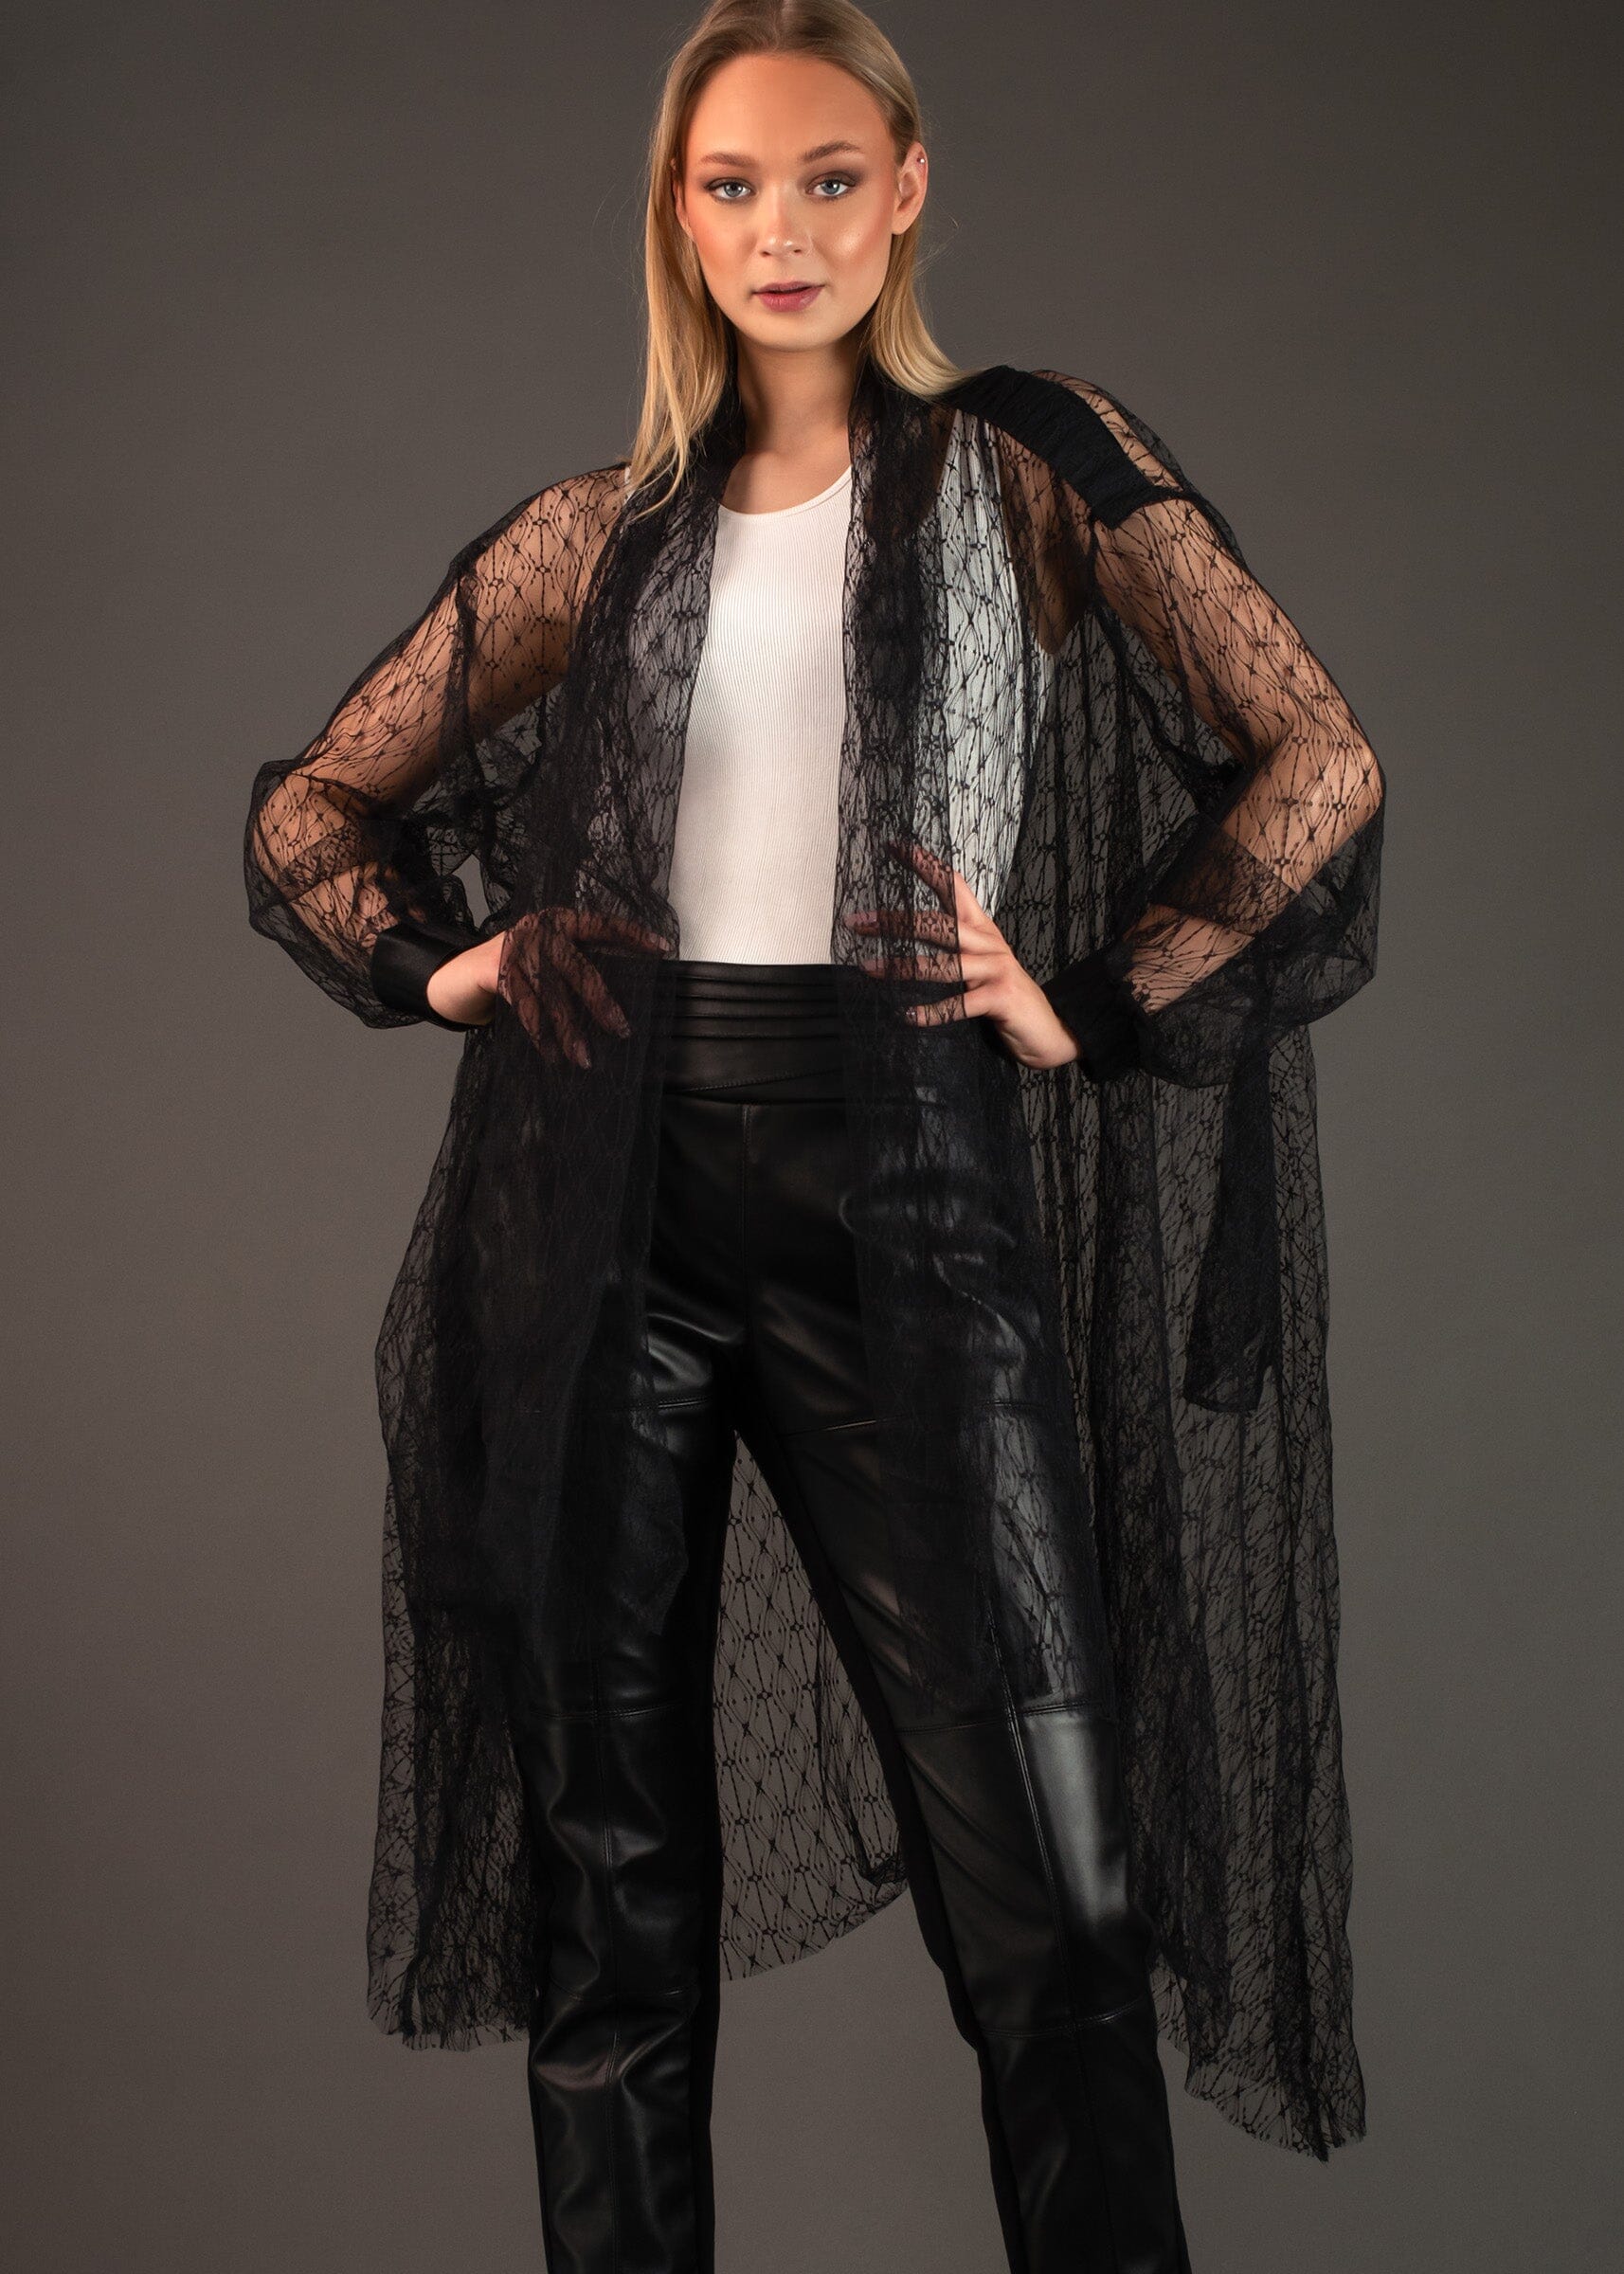 Sheer Patterned Layering Piece Layering Pieces Kate Hewko 